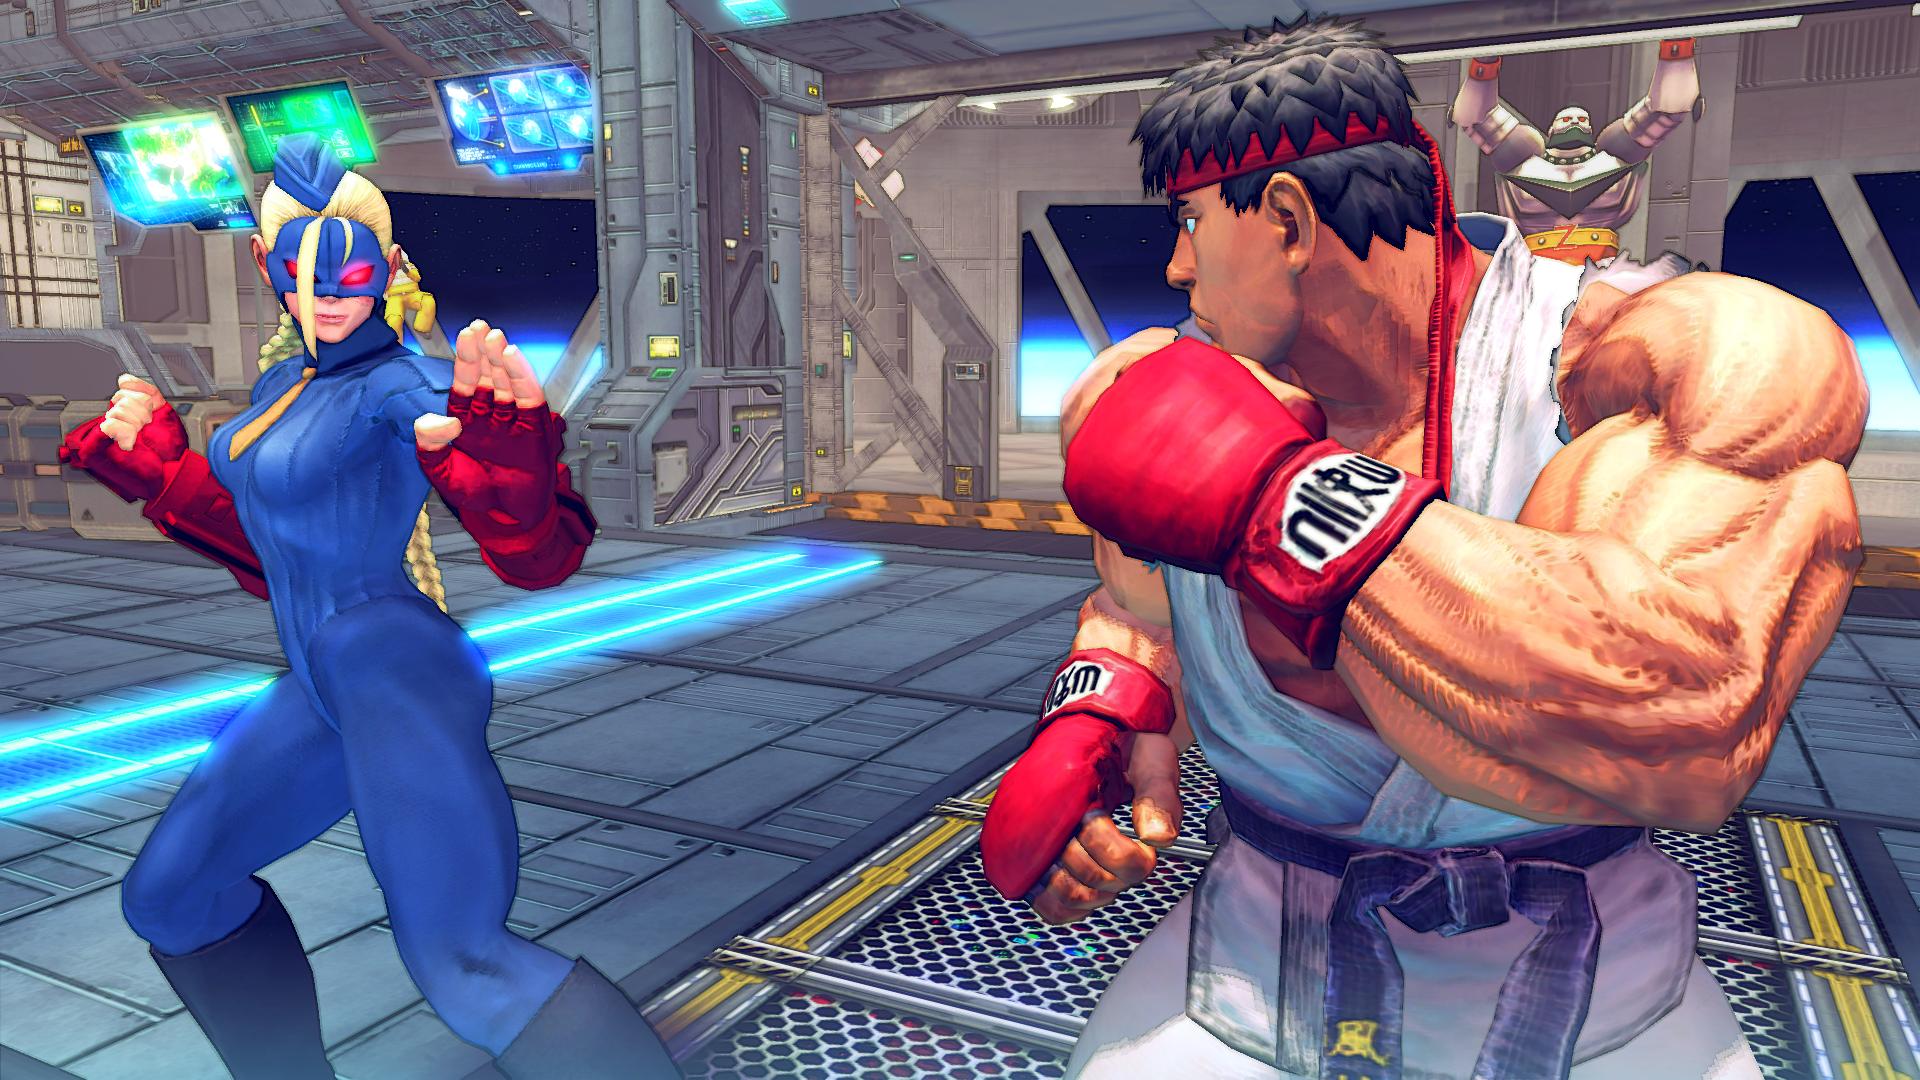 Ultra Street Fighter IV is Set for a May 26th Release on PS4